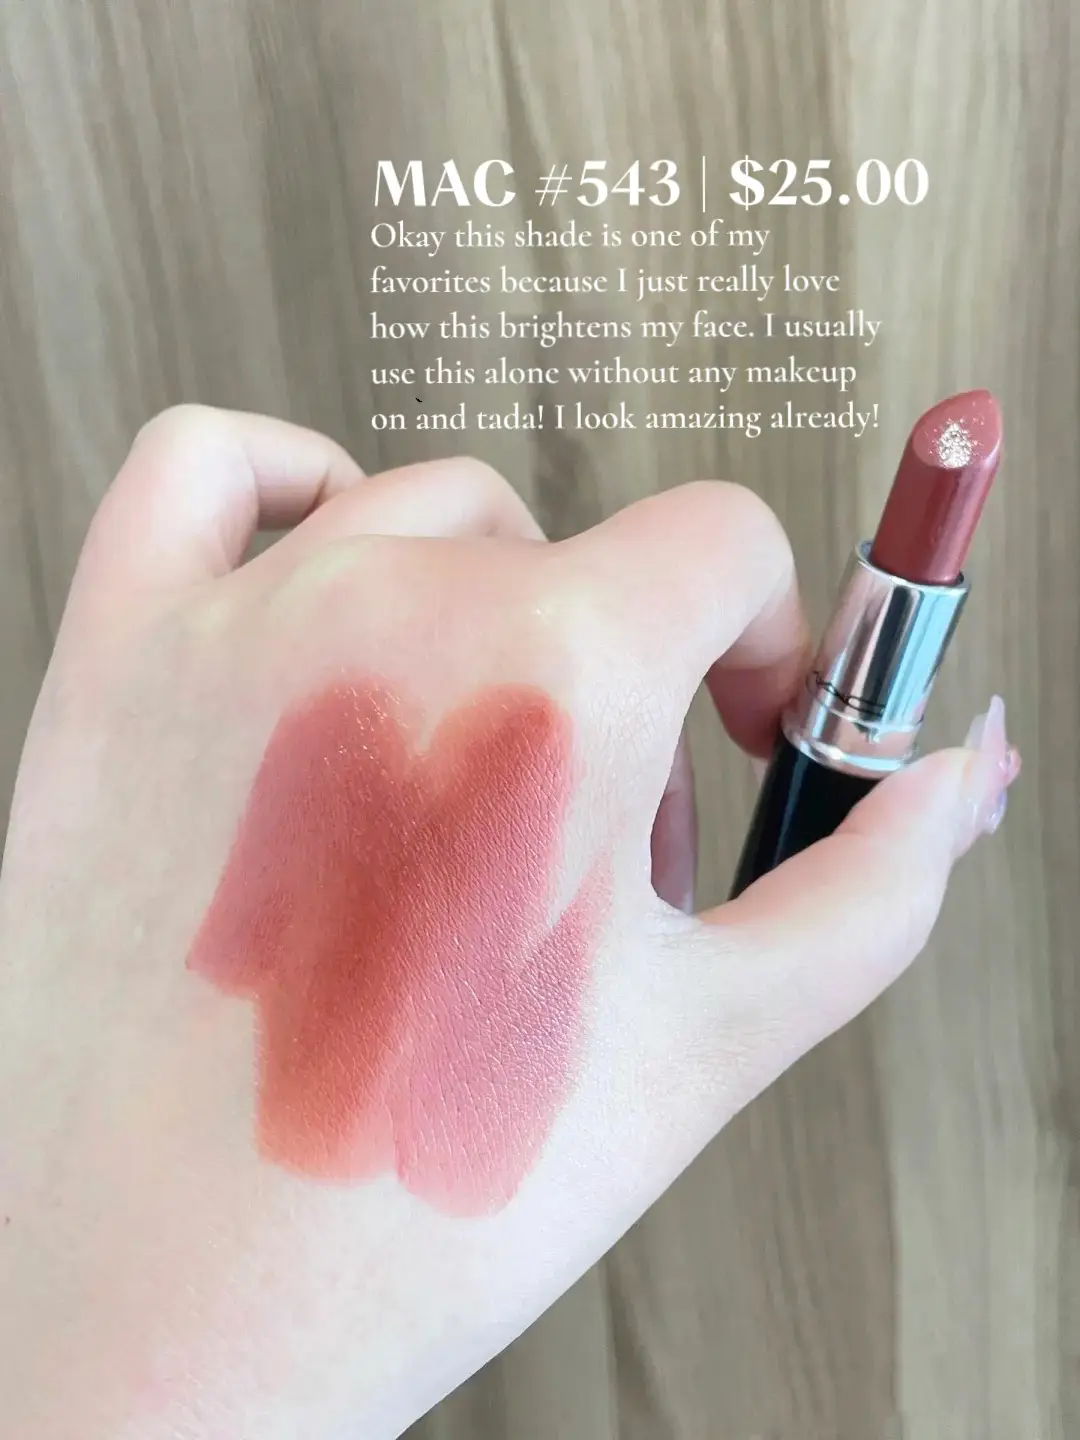 lipstick shade guide for beginners - Lemon8 Search